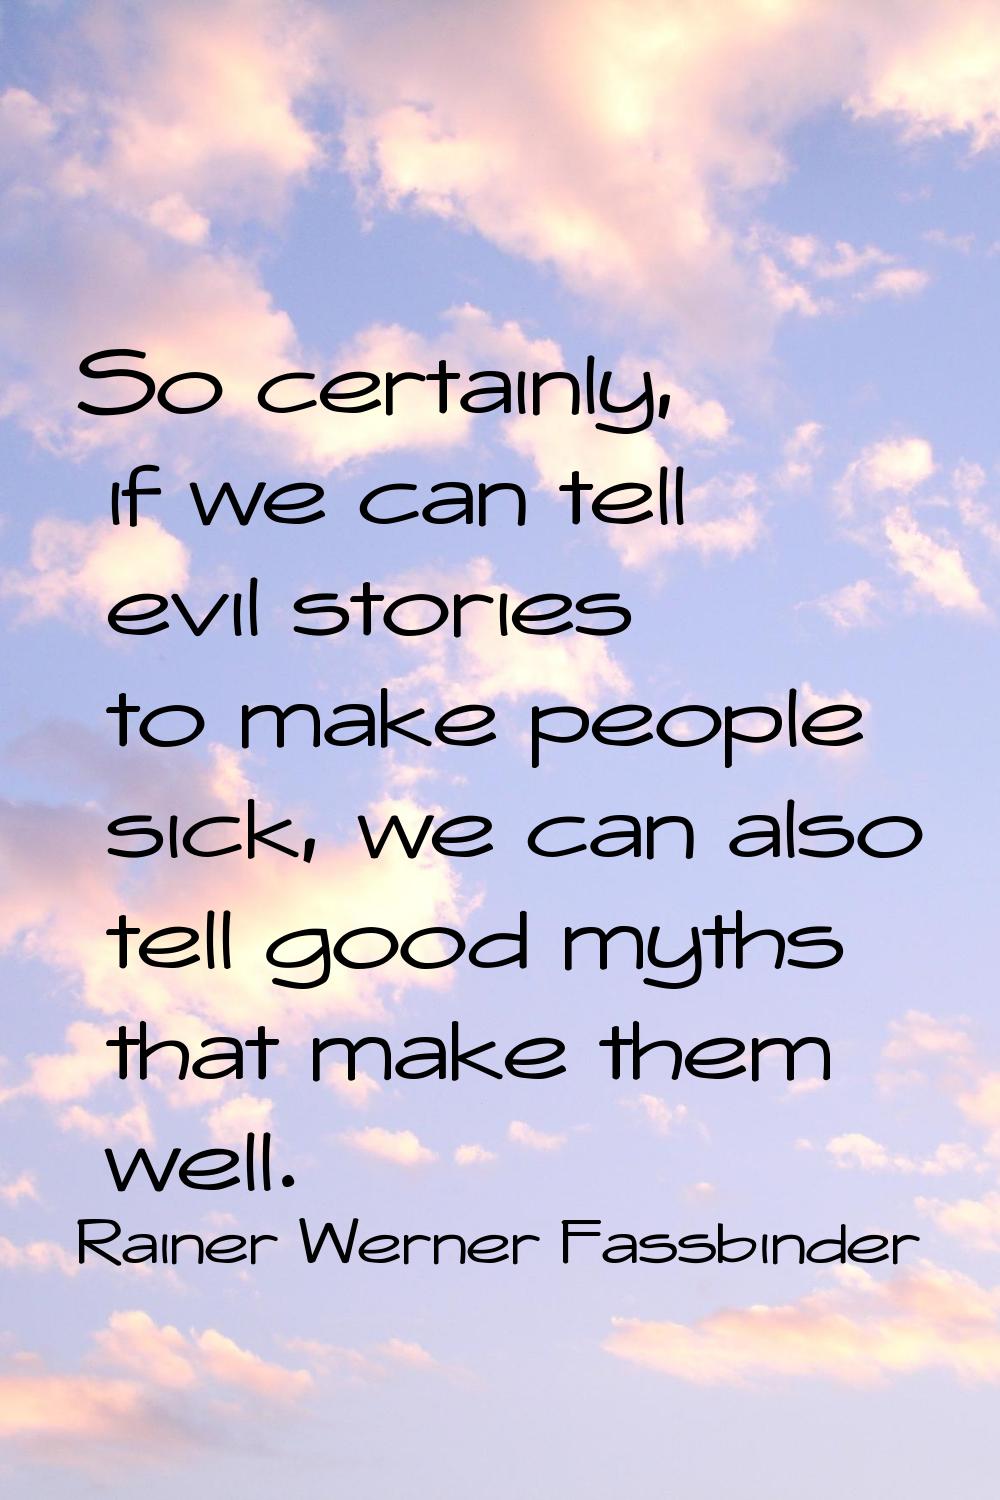 So certainly, if we can tell evil stories to make people sick, we can also tell good myths that mak